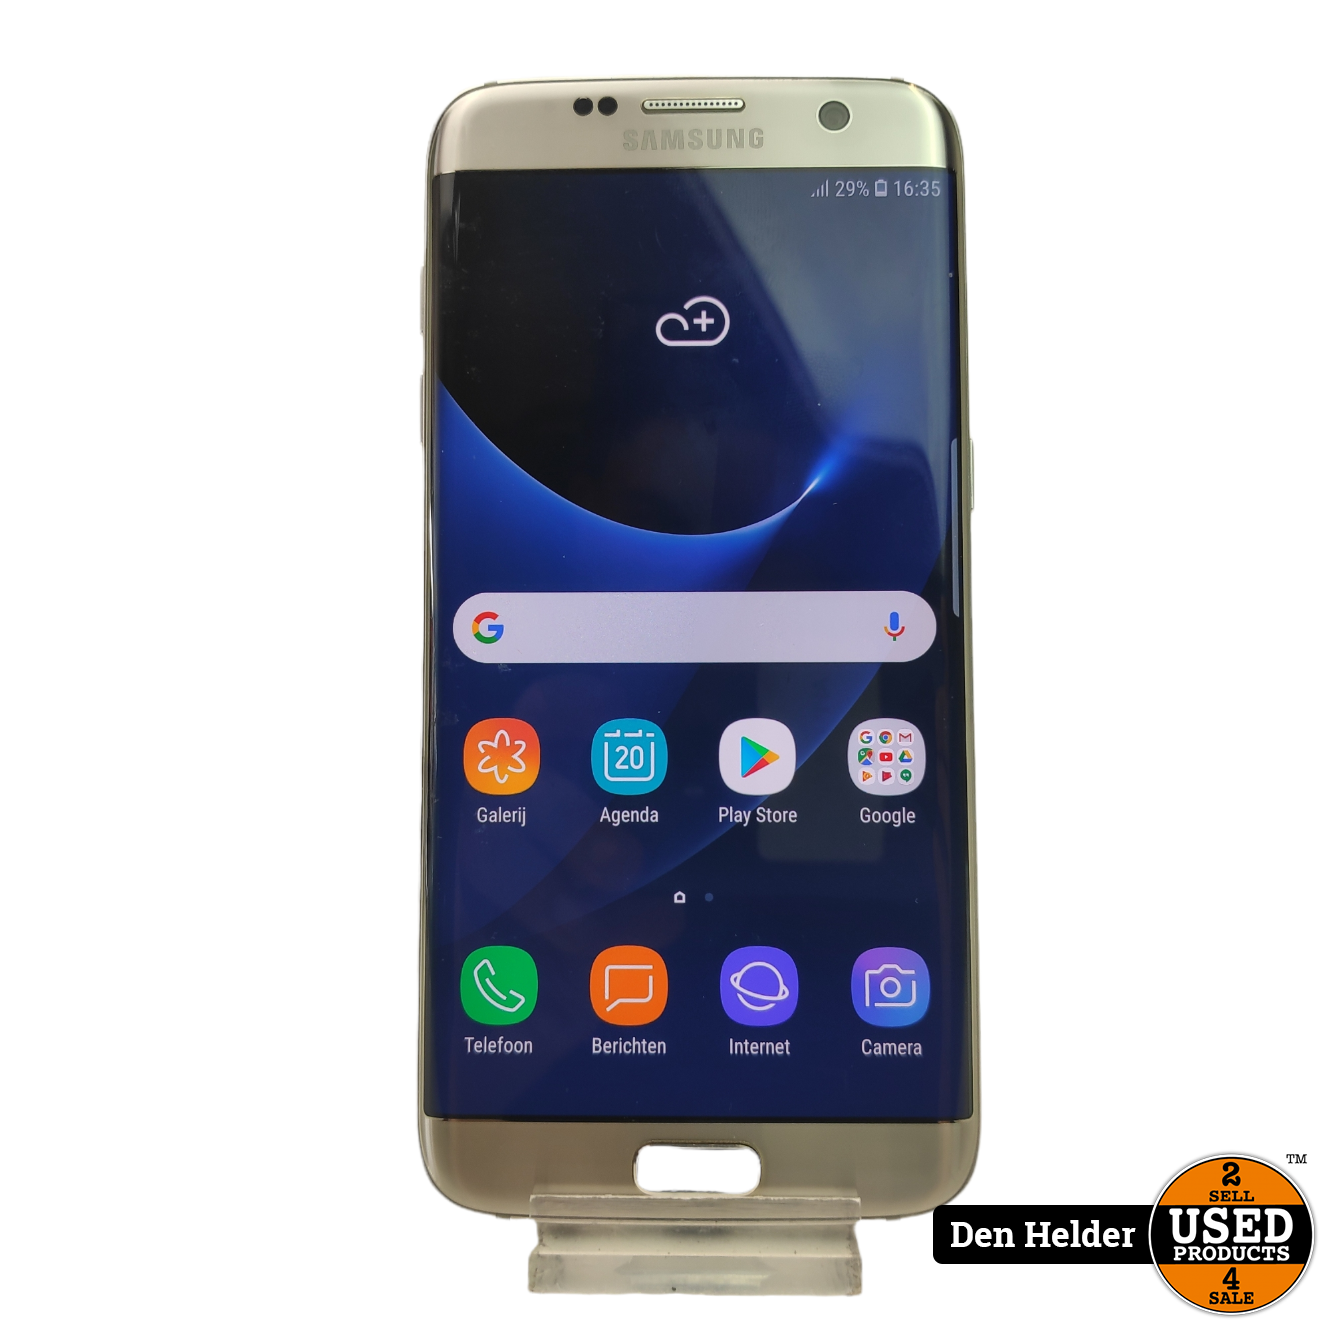 Matrix proza Keuze Samsung Galaxy S7 Edge 32GB Android 7 - In Goede Staat - Used Products Den  Helder